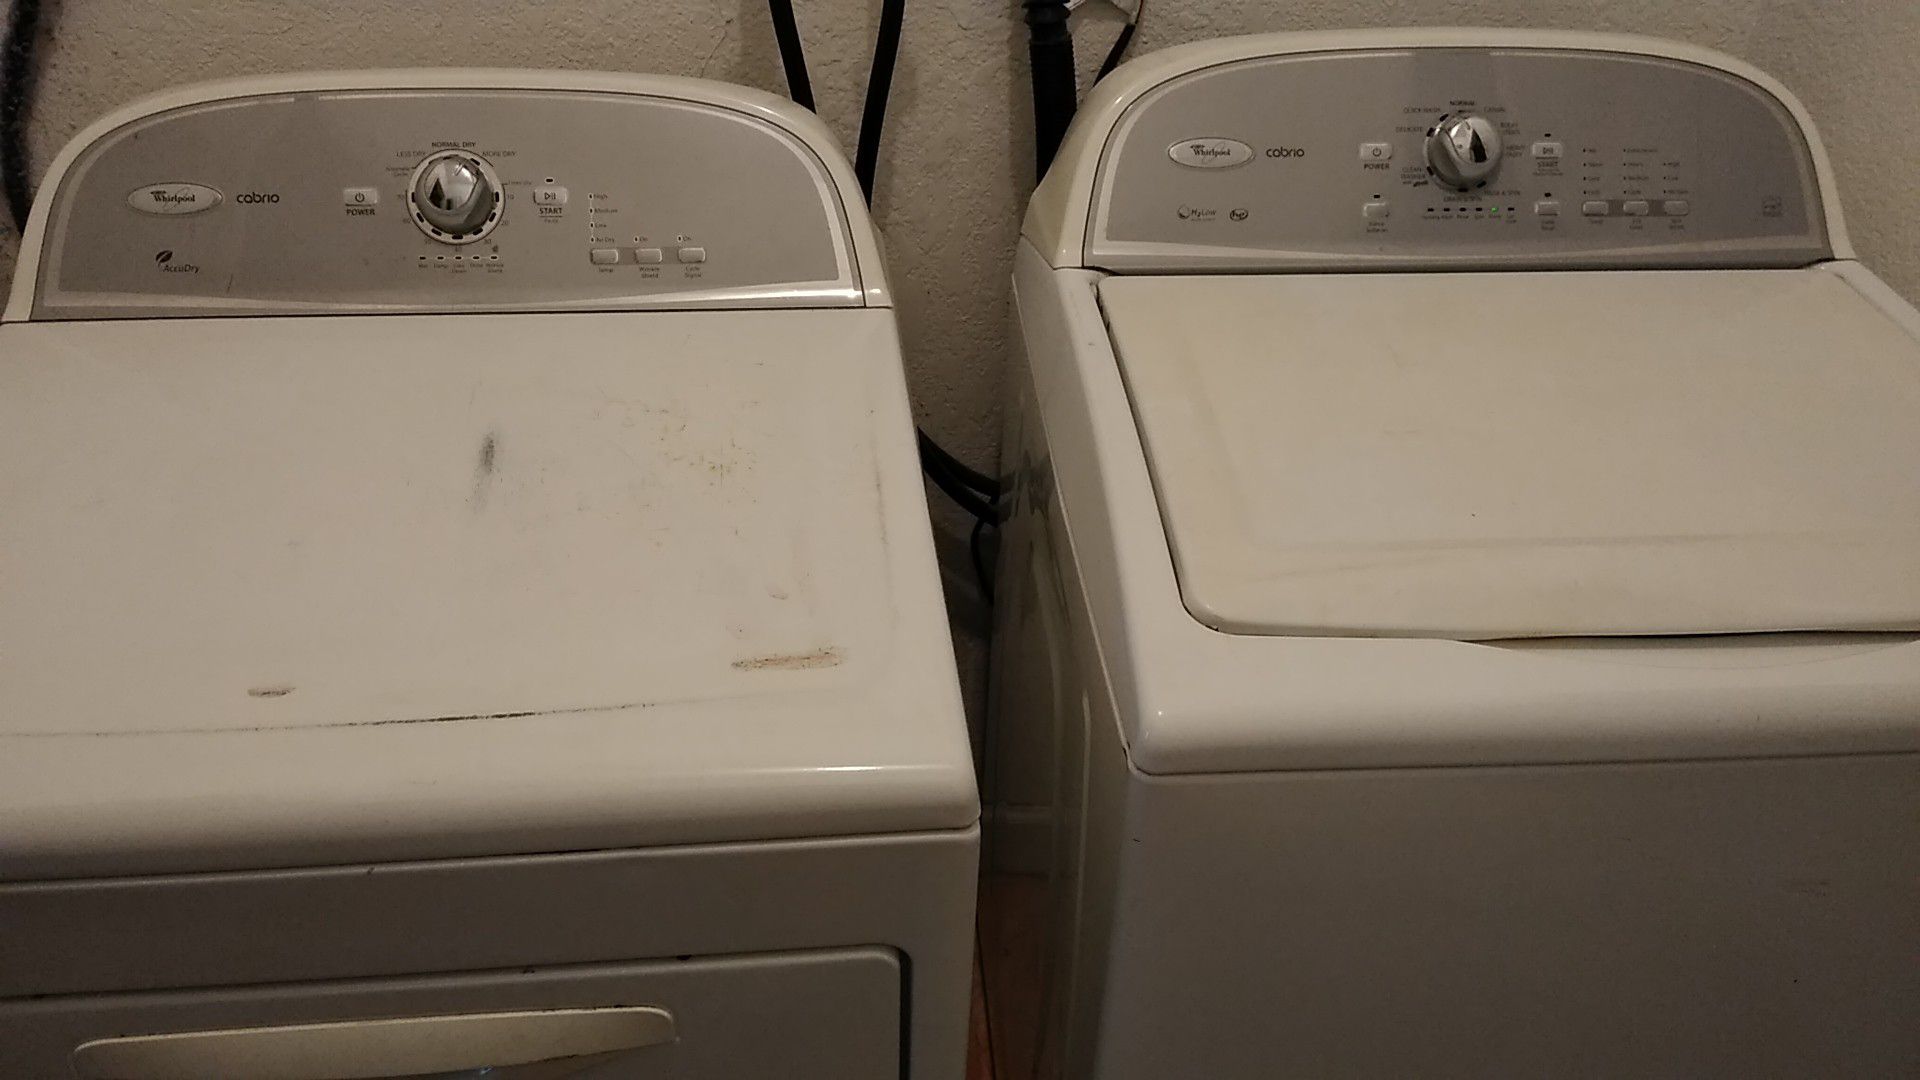 Washer and dryer both for $150 whirpool